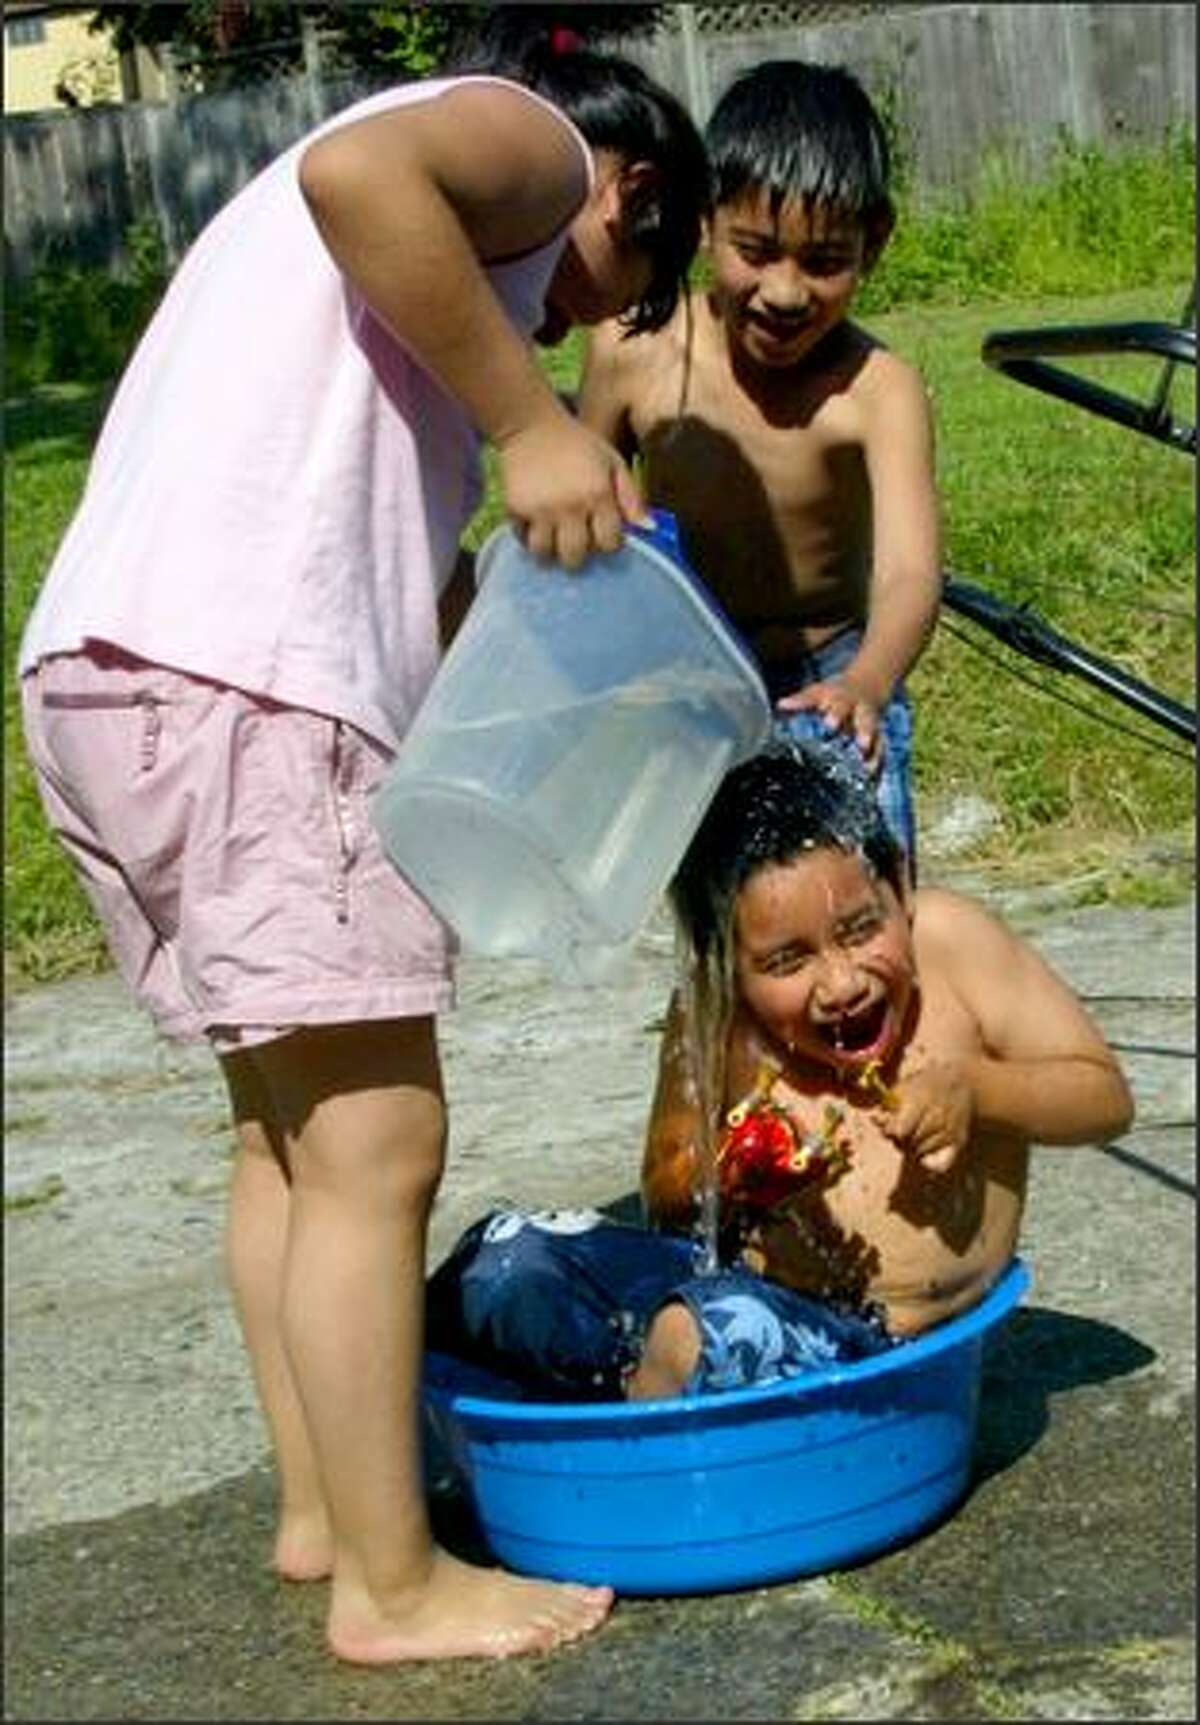 Eleven-year-old Miriam Mendoza and her brother, Irving, 9, "help" their younger brother, Axel, 6, keep cool in Monday's heat. The children were playing outside their mom's work.